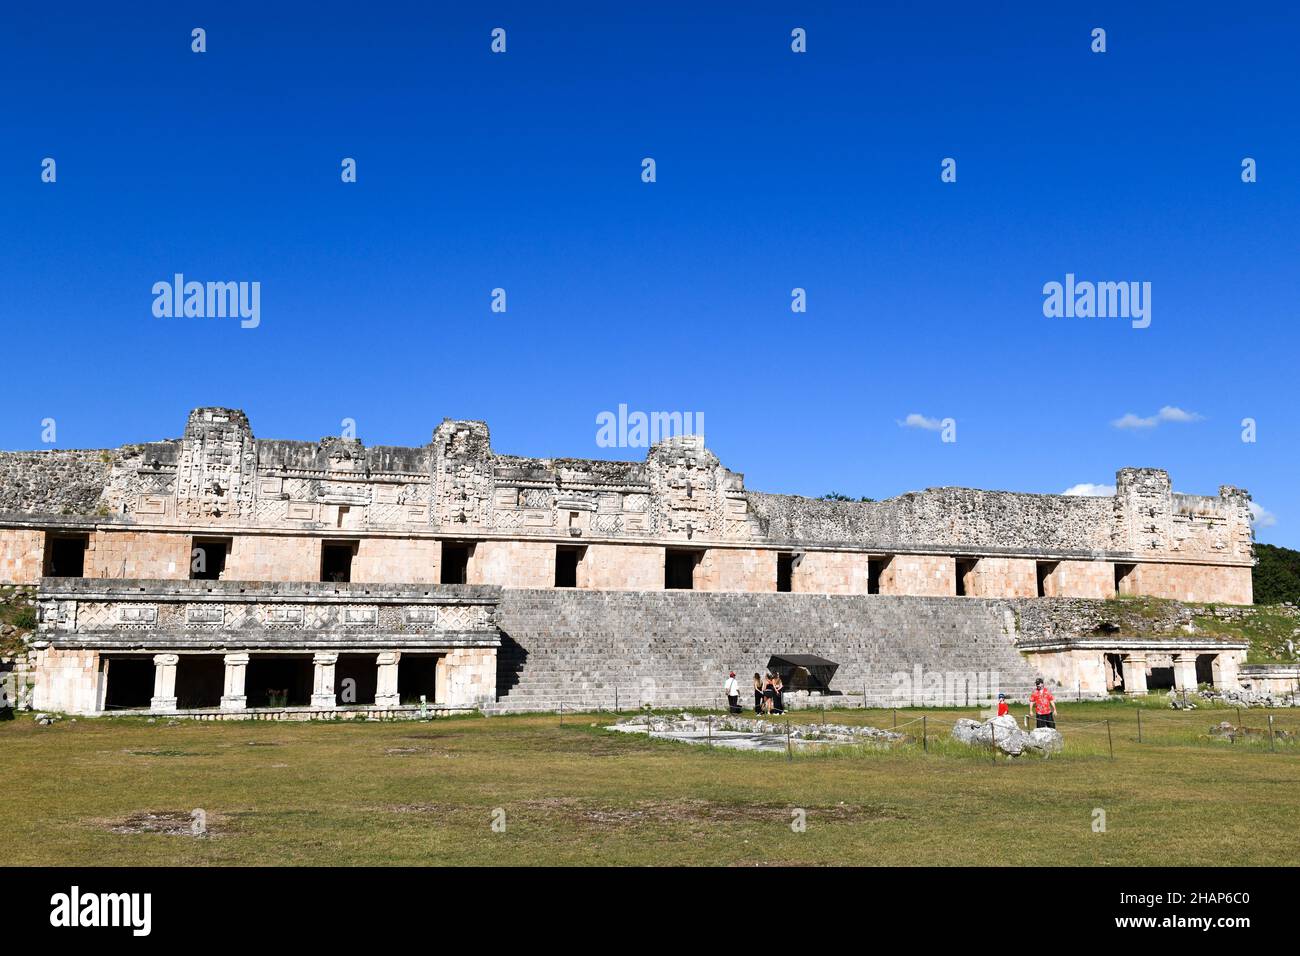 Uxmal is an ancient Maya city located in present-day Yucatan Mexico. It is considered one of the most important Mayan archeological sites Stock Photo